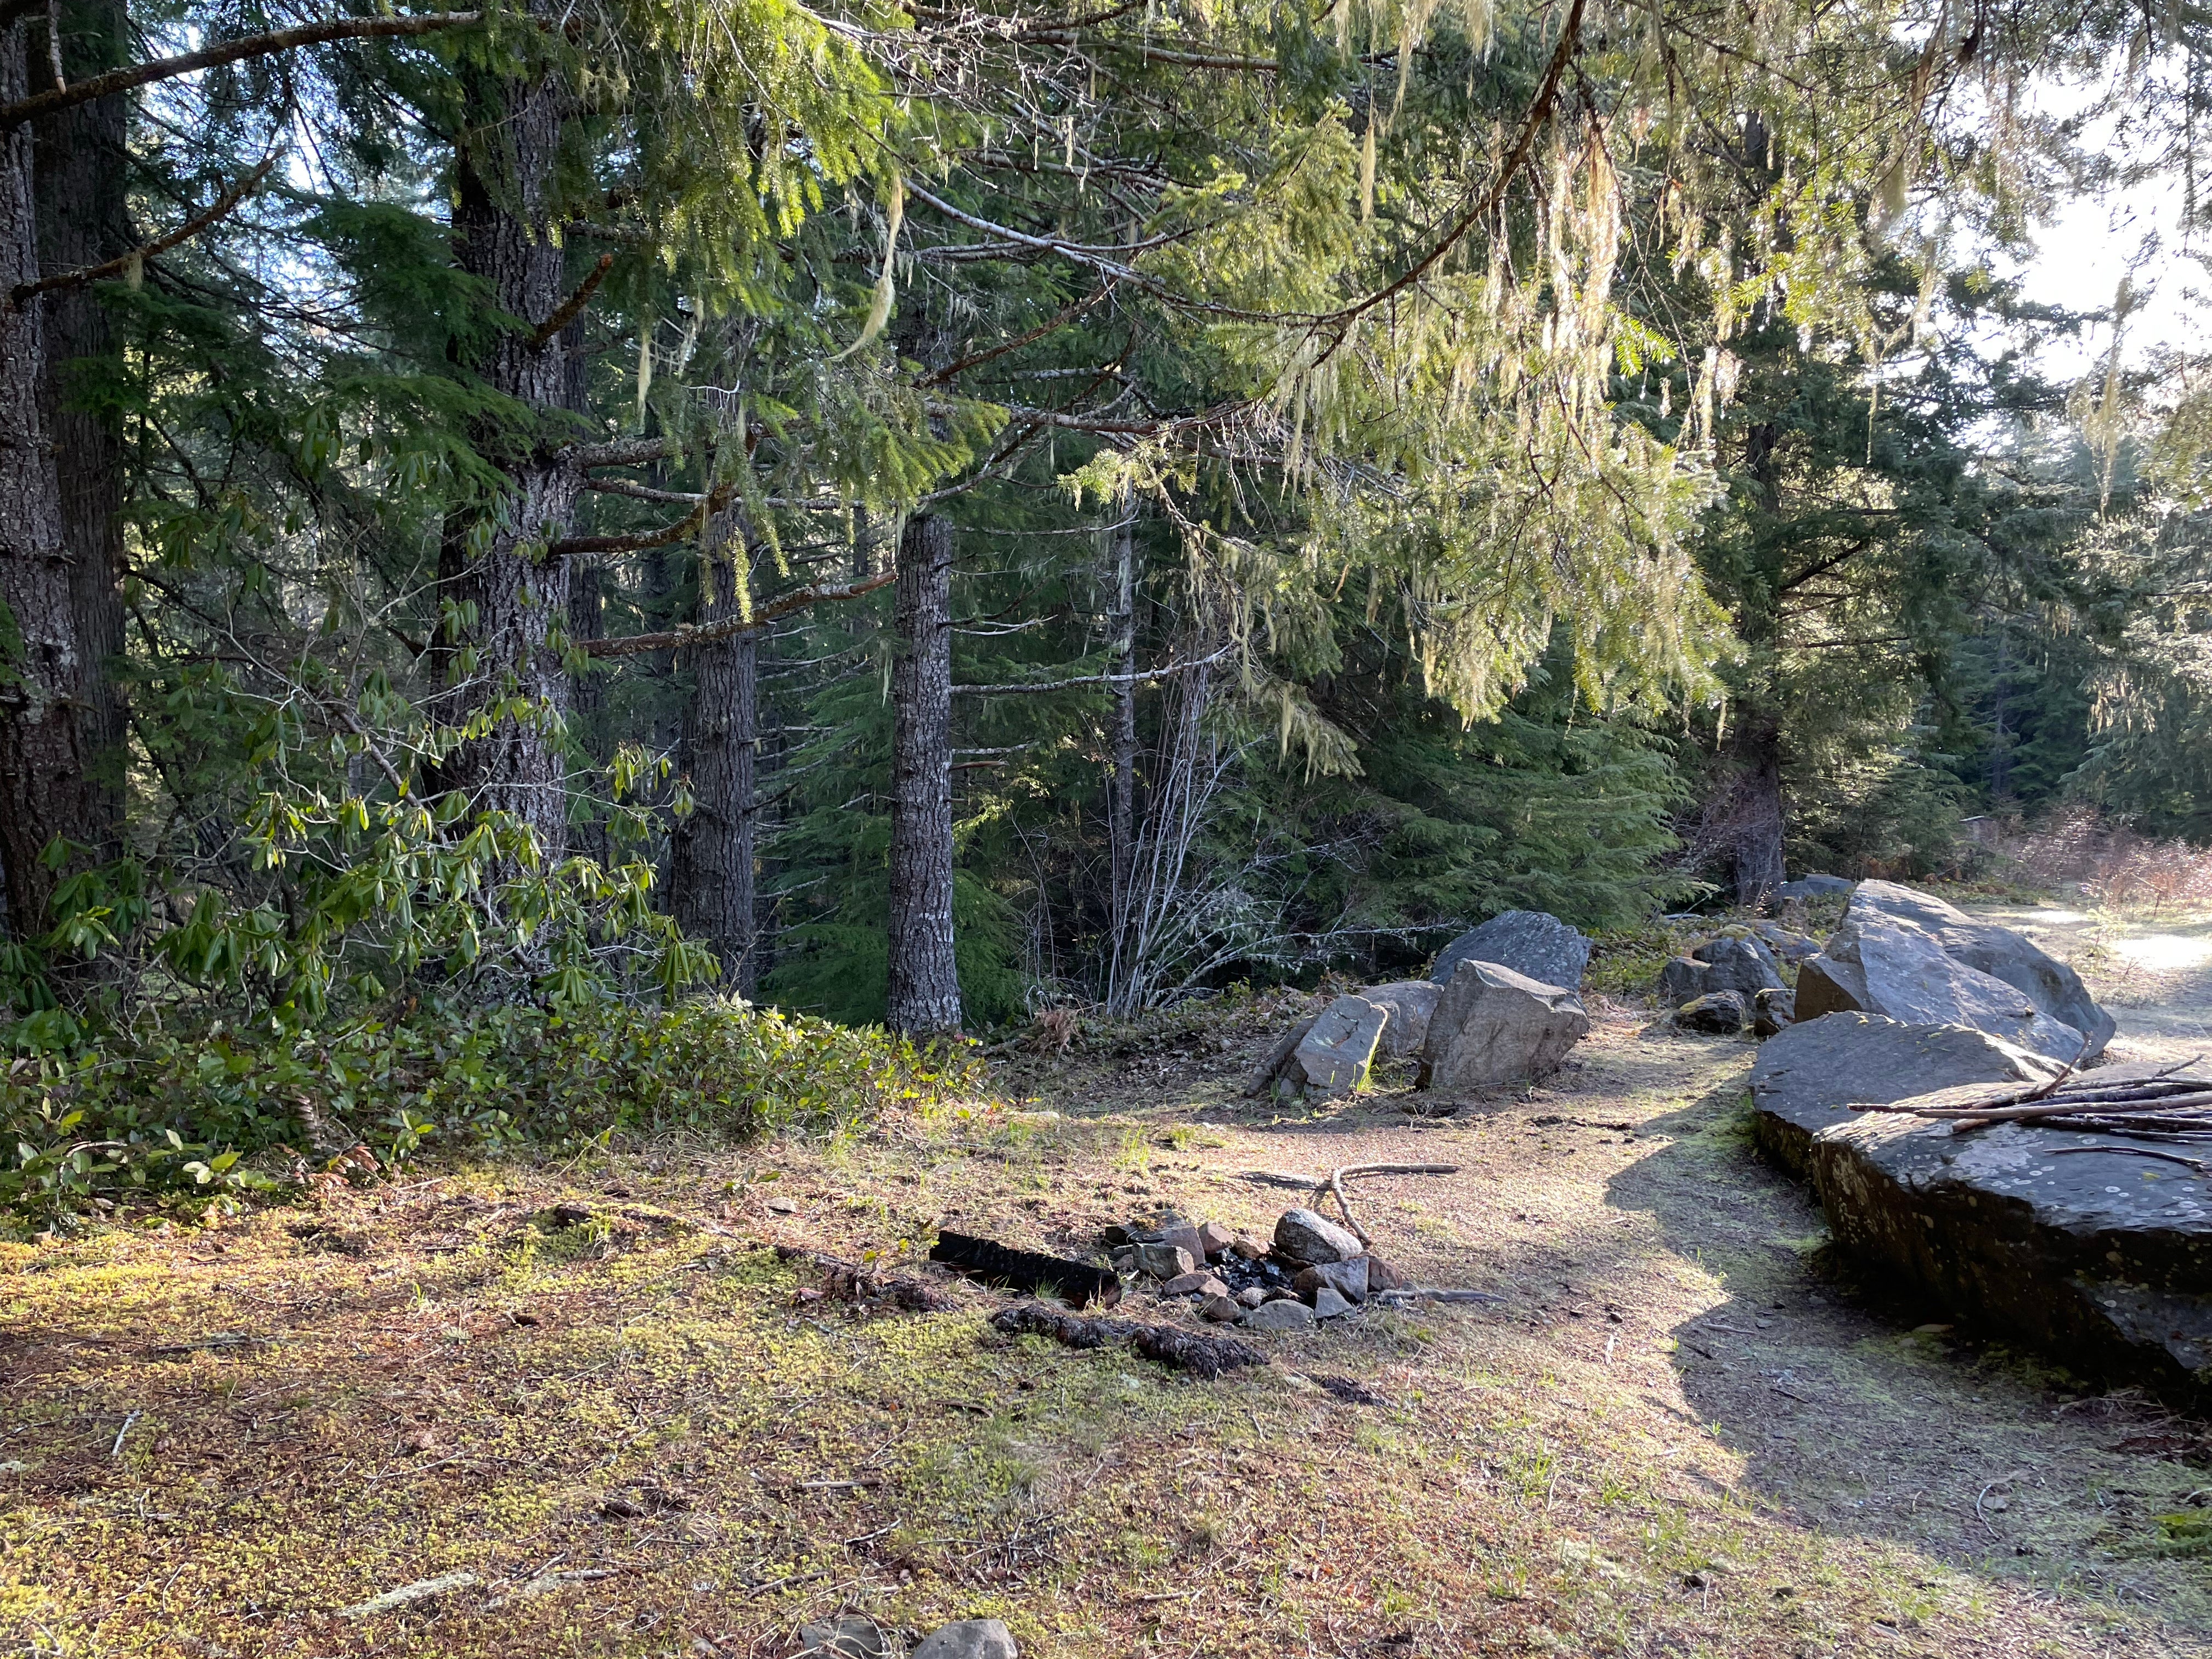 Camper submitted image from Slab Camp/Deer Ridge Trailhead - 1